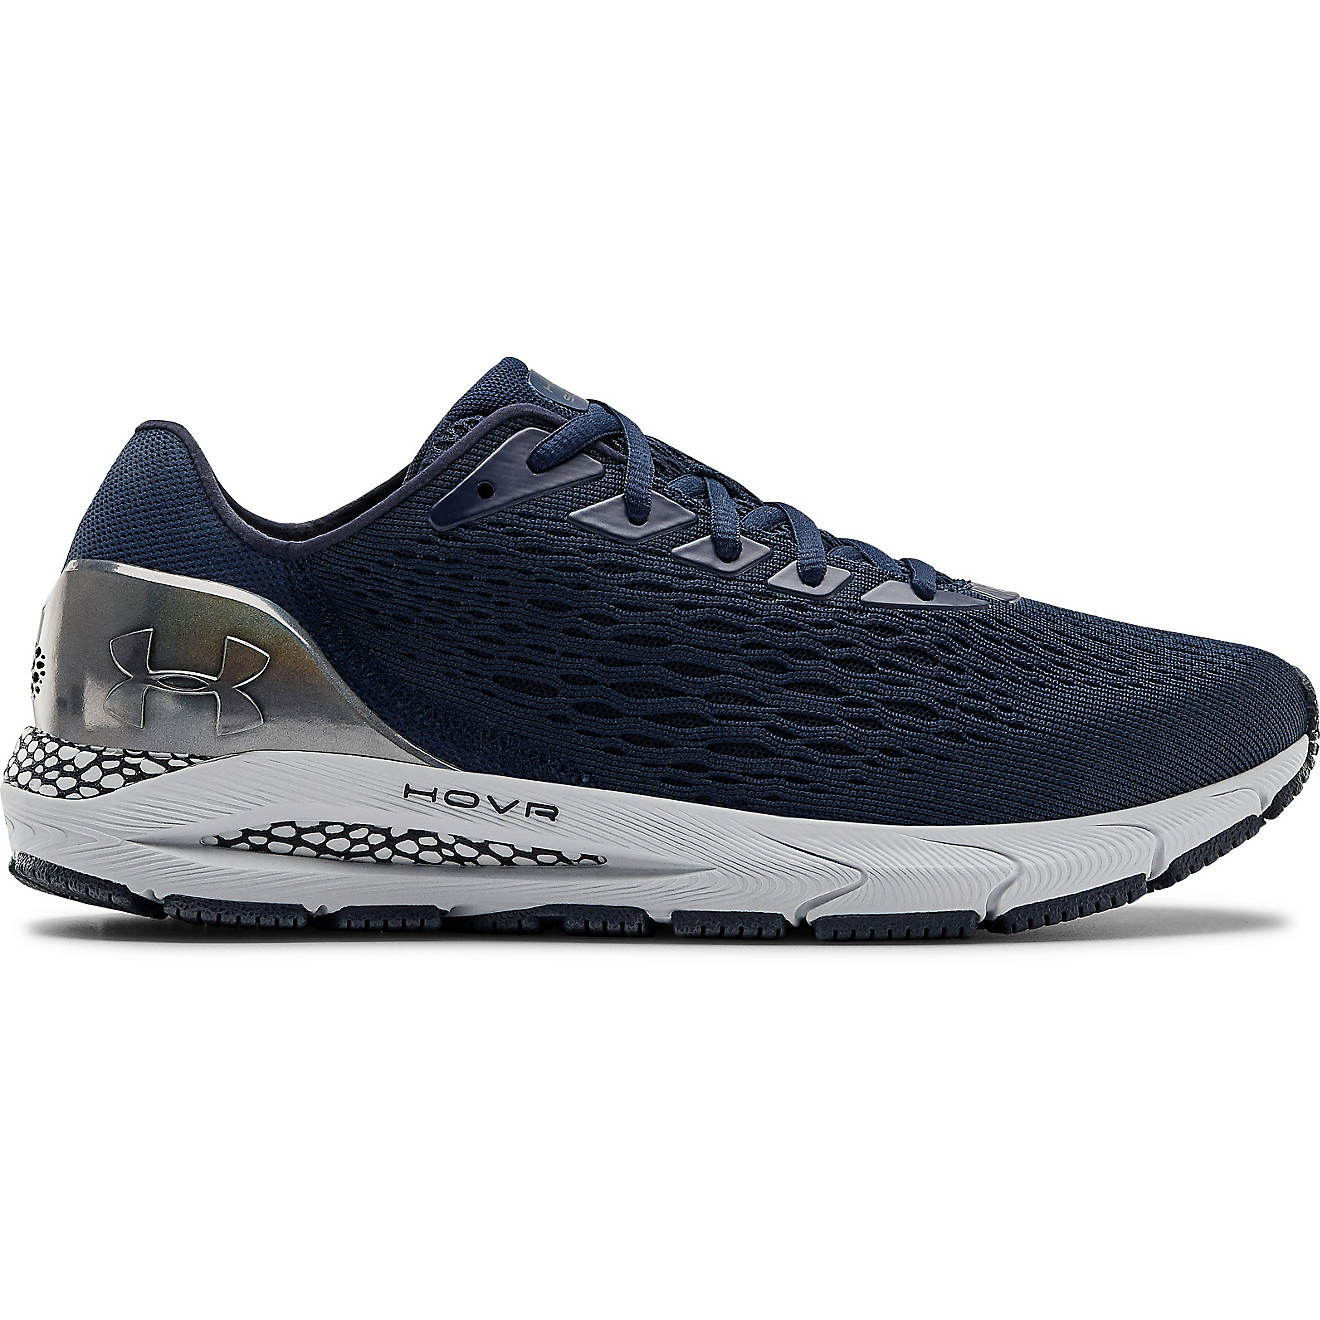 Under Armour Men's HOVR SONIC 3 Metallic Running Shoes | Academy